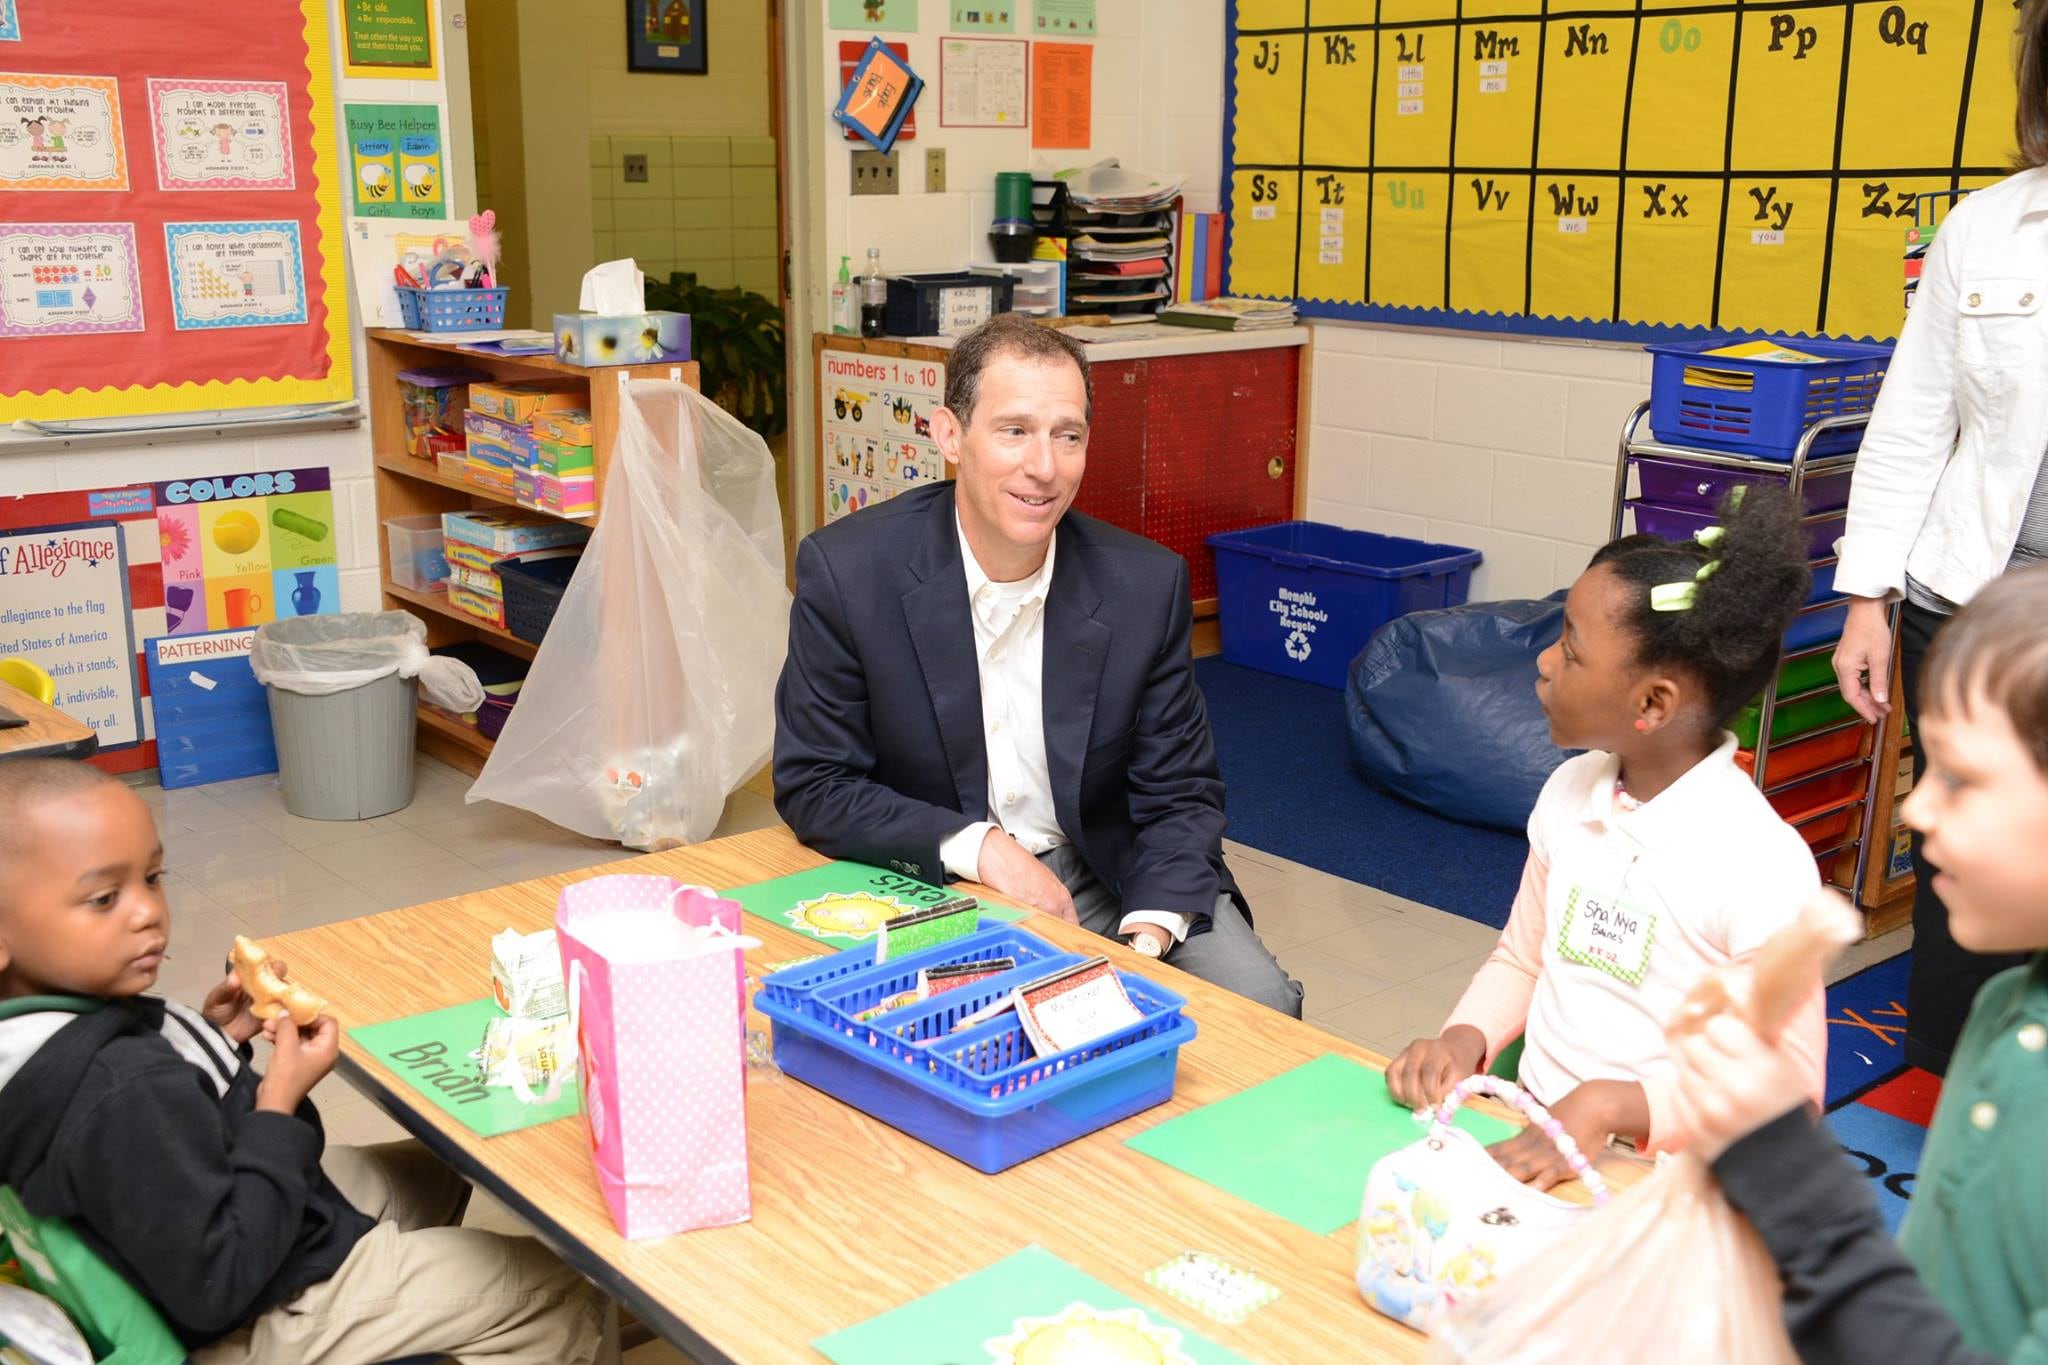 A male politician in a suit jacket sits at a small table in an elementary school classroom with two young students. A young girl looks at him inquisitively.